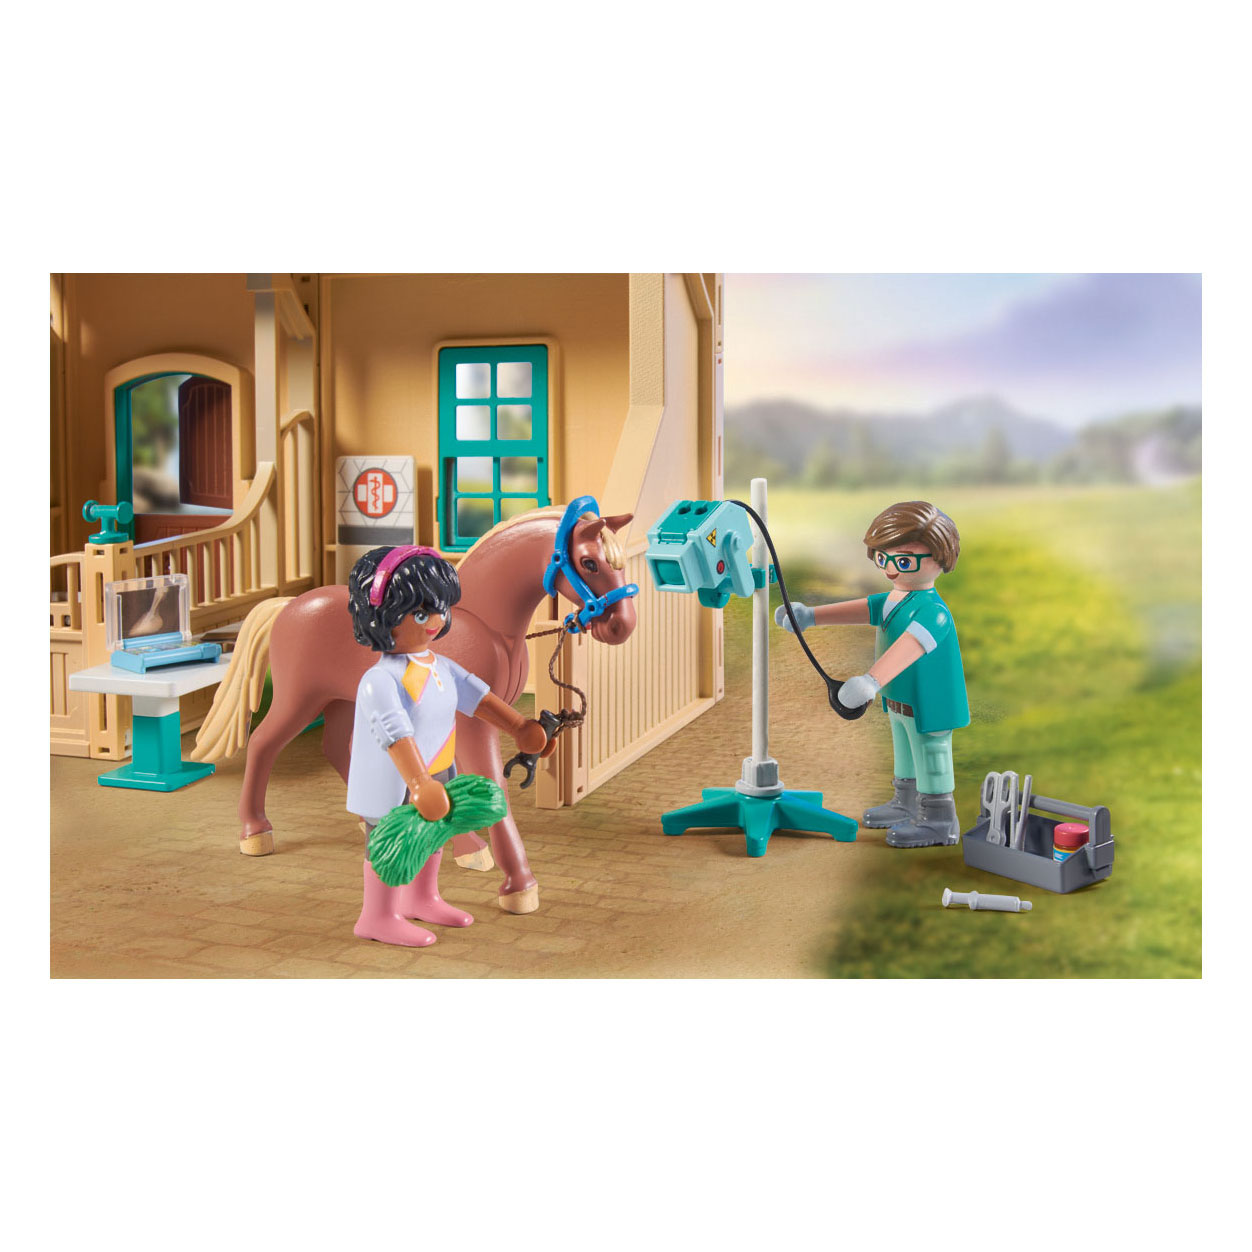 PLAYMOBIL Horses of Waterfall 71352 Riding Therapy and Veterinary